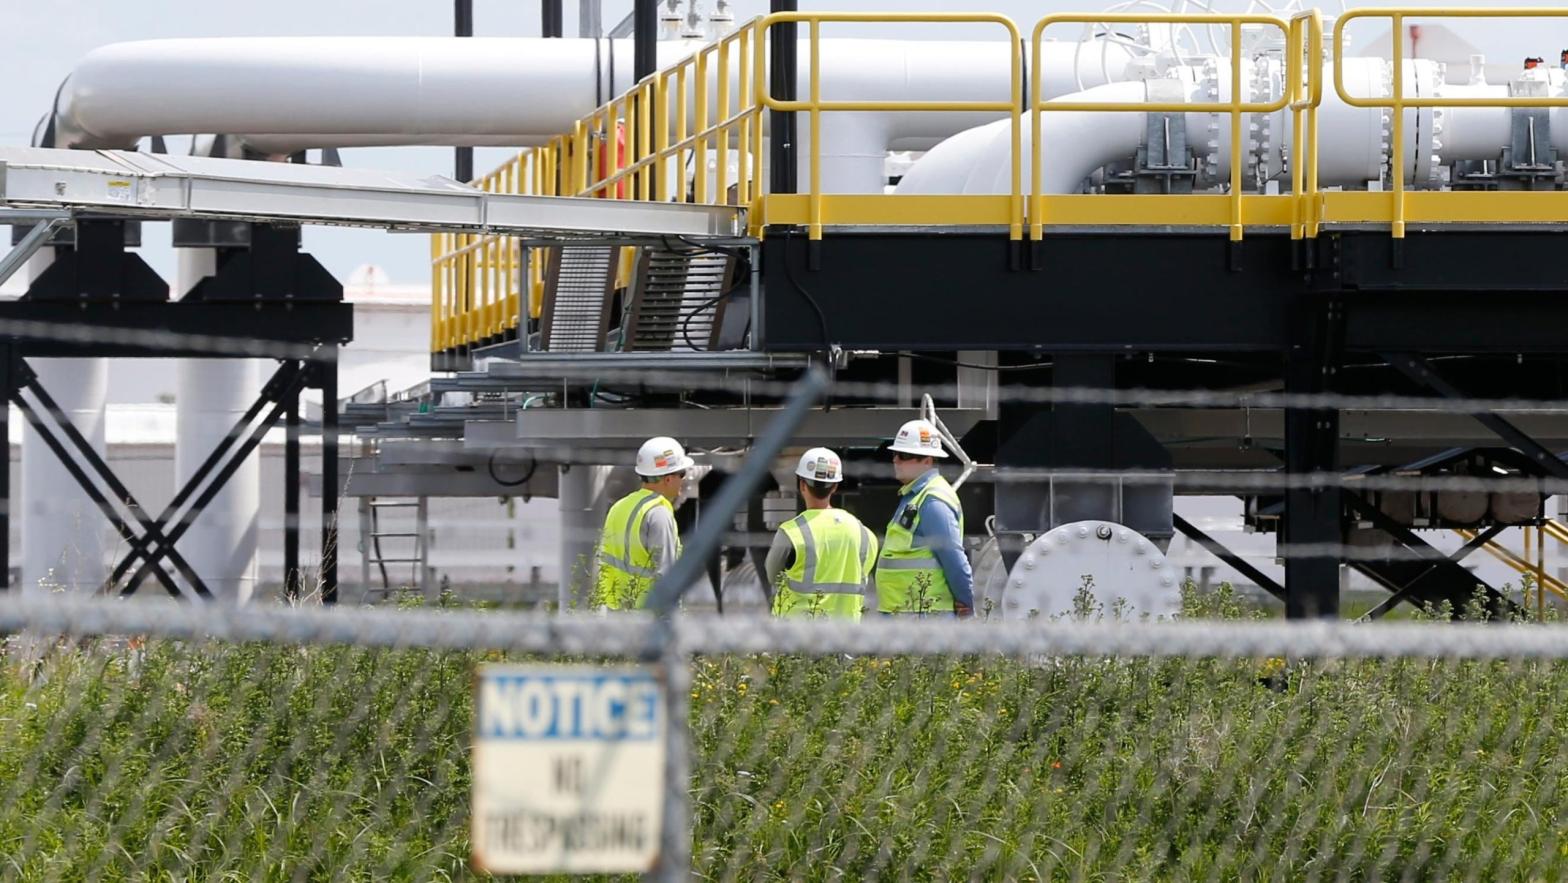 Workers at Enbridge Energy's terminal in Superior, Wisconsin, as seen in June 2018. (Photo: Jime Mone / File, AP)